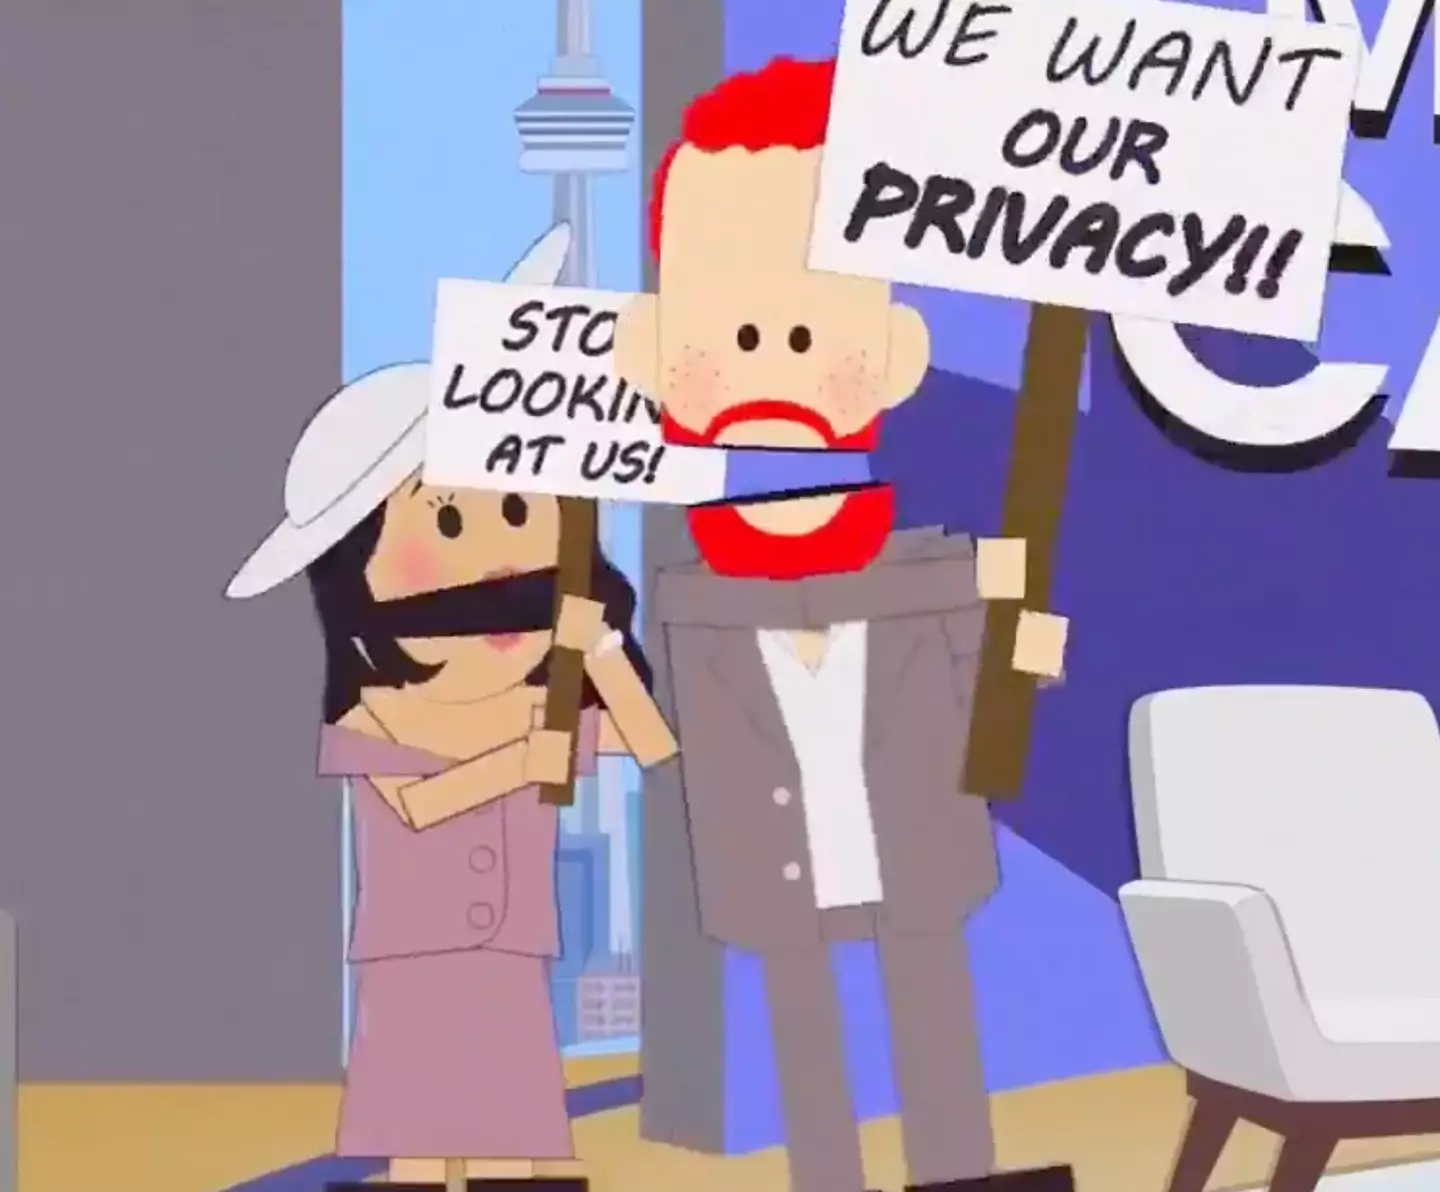 The episode sees the prince and princess on their 'Worldwide Privacy Tour'.